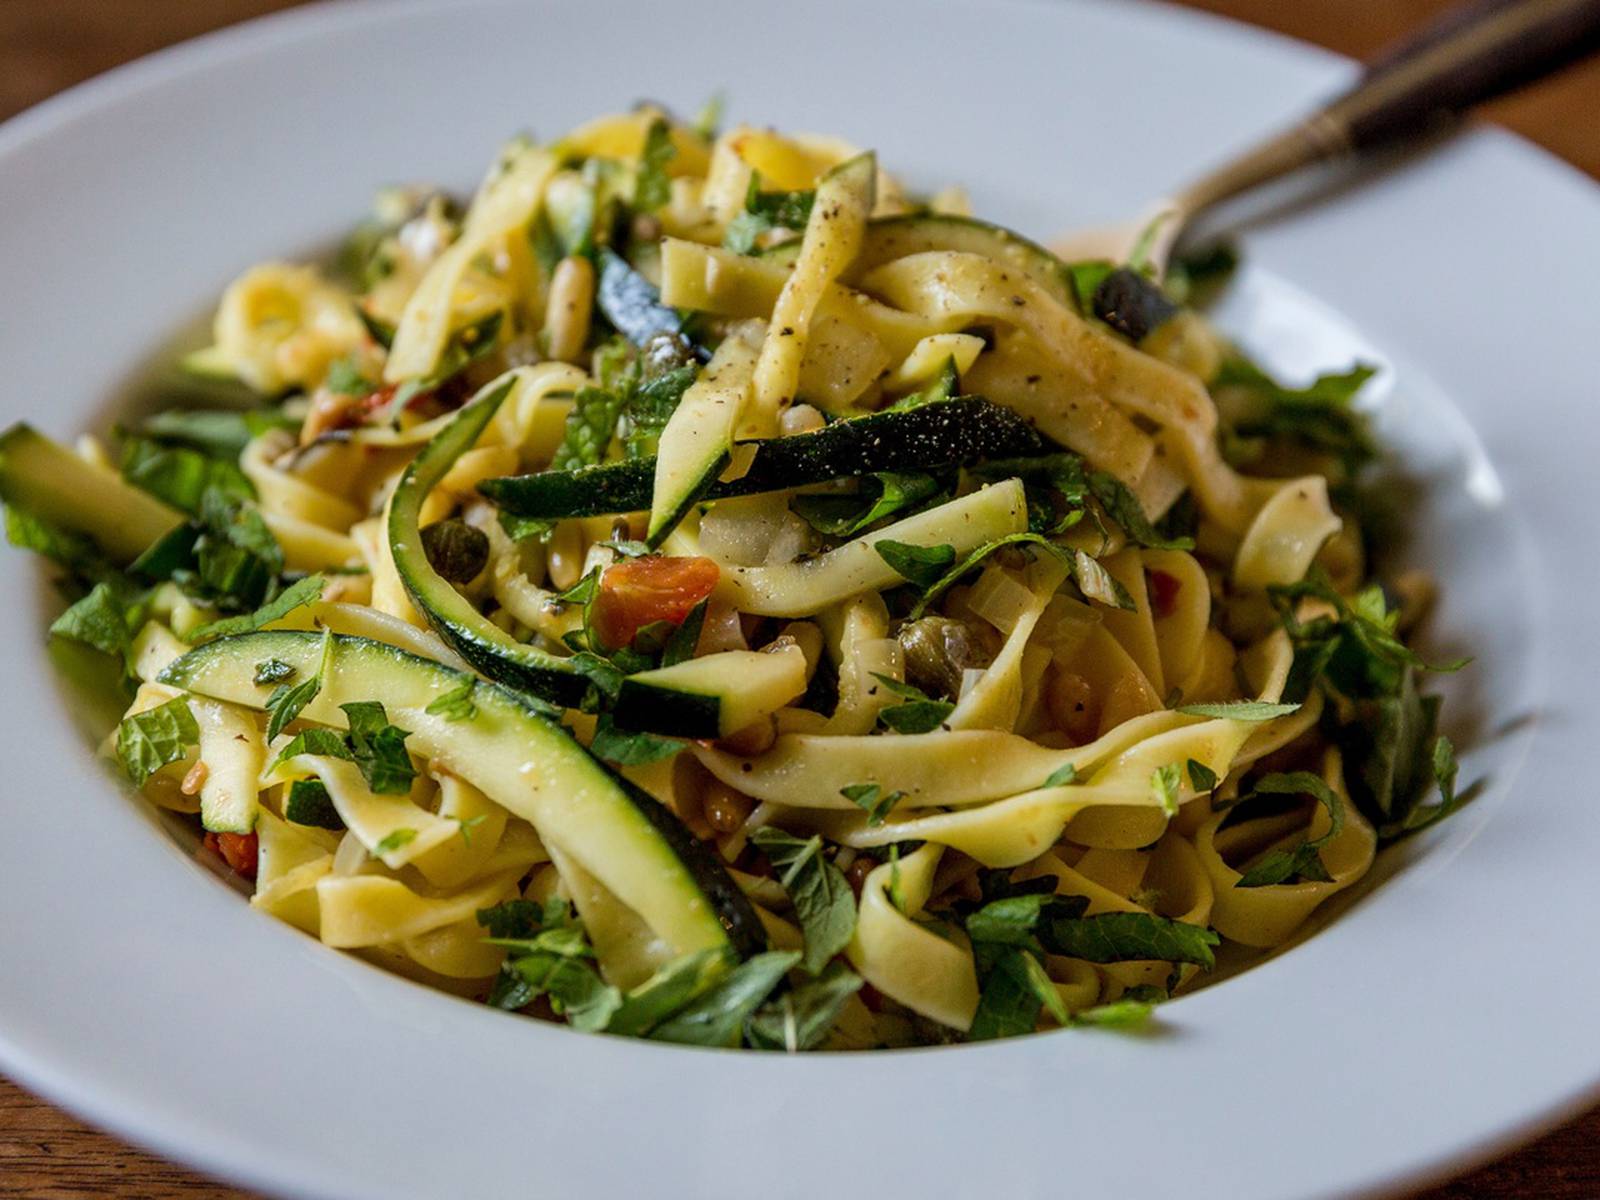 Pasta with courgettes, lemon, pine nuts and herbs – The Irish Times